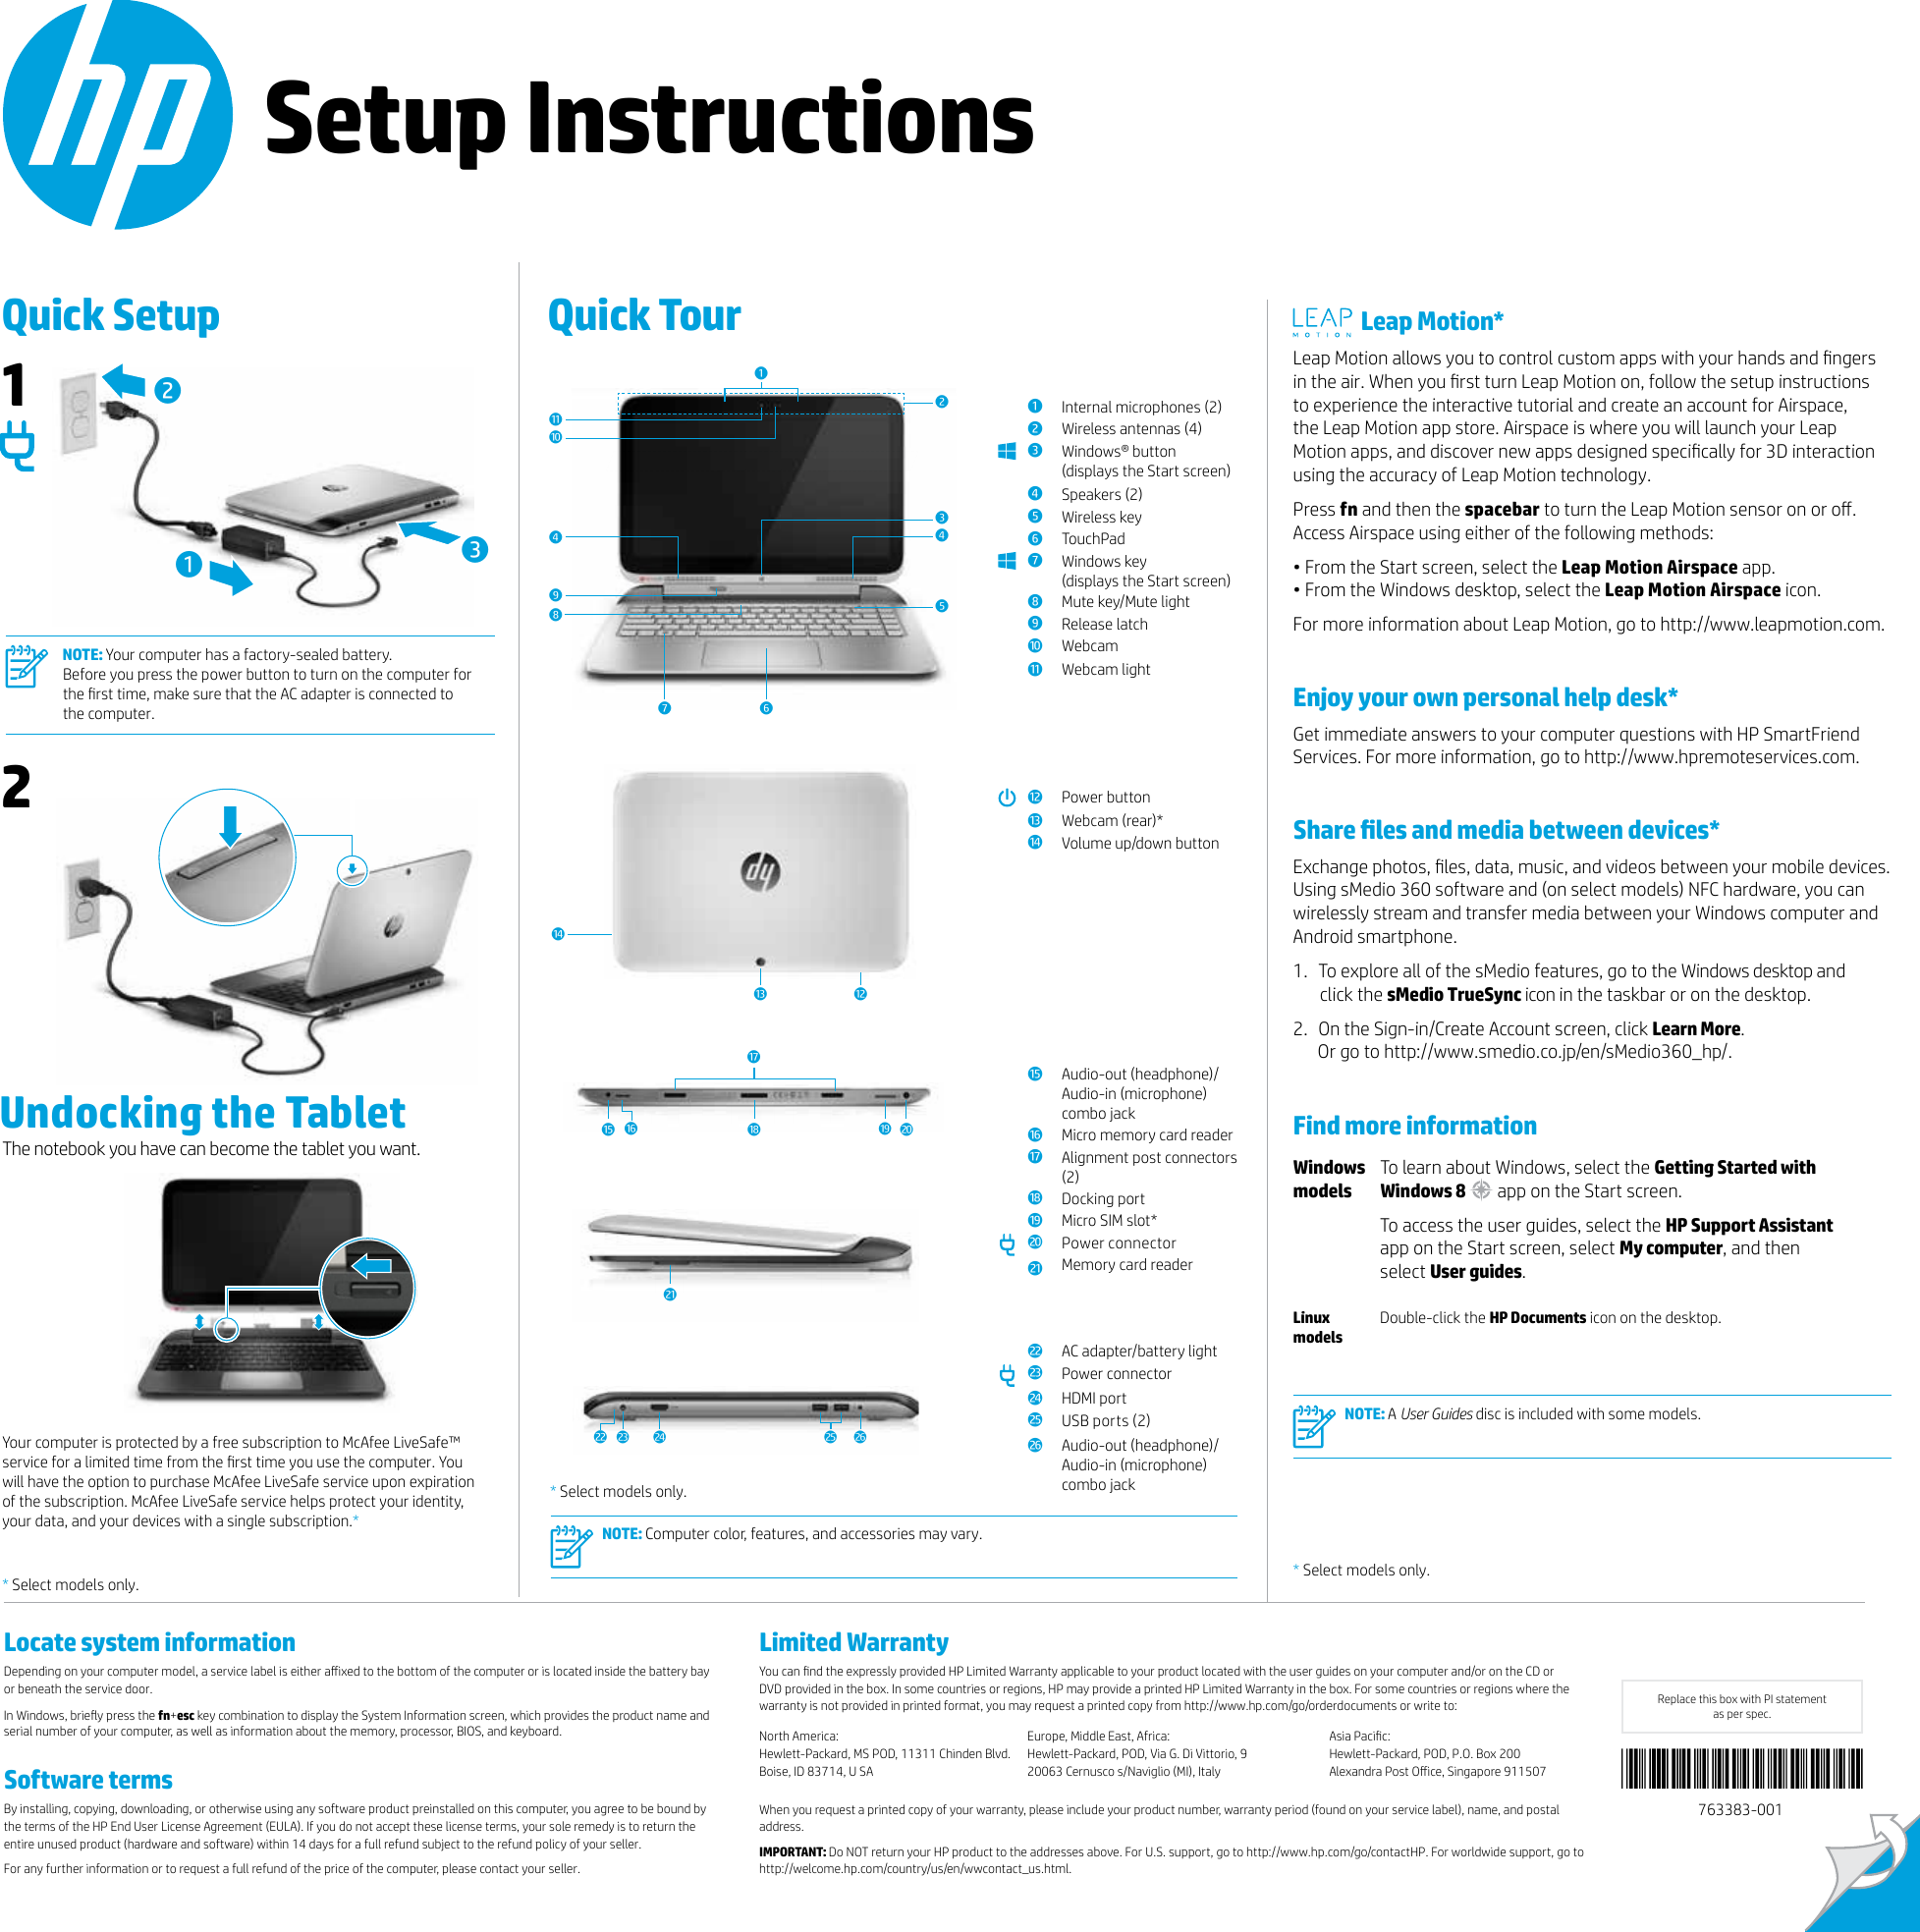 Setup InstructionsQuick Setup  Quick Tour * Select models only.Limited WarrantyYou can nd the expressly provided HP Limited Warranty applicable to your product located with the user guides on your computer and/or on the CD or DVD provided in the box. In some countries or regions, HP may provide a printed HP Limited Warranty in the box. For some countries or regions where the warranty is not provided in printed format, you may request a printed copy from http://www.hp.com/go/orderdocuments or write to:North America: Hewlett-Packard, MS POD, 11311 Chinden Blvd. Boise, ID 83714, U SAEurope, Middle East, Africa: Hewlett-Packard, POD, Via G. Di Vittorio, 9 20063 Cernusco s/Naviglio (MI), ItalyAsia Pacic: Hewlett-Packard, POD, P.O. Box 200 Alexandra Post Oice, Singapore 911507 When you request a printed copy of your warranty, please include your product number, warranty period (found on your service label), name, and postal address.IMPORTANT: Do NOT return your HP product to the addresses above. For U.S. support, go to http://www.hp.com/go/contactHP. For worldwide support, go to http://welcome.hp.com/country/us/en/wwcontact_us.html.* Select models only.  Leap Motion*Leap Motion allows you to control custom apps with your hands and ngers in the air. When you rst turn Leap Motion on, follow the setup instructions  to experience the interactive tutorial and create an account for Airspace,  the Leap Motion app store. Airspace is where you will launch your Leap Motion apps, and discover new apps designed specically for 3D interaction using the accuracy of Leap Motion technology. Press fn and then the spacebar to turn the Leap Motion sensor on or o. Access Airspace using either of the following methods:• From the Start screen, select the Leap Motion Airspace app. • From the Windows desktop, select the Leap Motion Airspace icon.For more information about Leap Motion, go to http://www.leapmotion.com.Enjoy your own personal help desk*Get immediate answers to your computer questions with HP SmartFriend Services. For more information, go to http://www.hpremoteservices.com.Share les and media between devices*Exchange photos, les, data, music, and videos between your mobile devices. Using sMedio 360 software and (on select models) NFC hardware, you can wirelessly stream and transfer media between your Windows computer and Android smartphone.1.  To explore all of the sMedio features, go to the Windows desktop and click the sMedio TrueSync icon in the taskbar or on the desktop. 2.  On the Sign-in/Create Account screen, click Learn More.  Or go to http://www.smedio.co.jp/en/sMedio360_hp/.Find more informationWindows modelsTo learn about Windows, select the Getting Started with Windows 8  app on the Start screen.To access the user guides, select the HP Support Assistant app on the Start screen, select My computer, and then select User guides.  Linux  modelsDouble-click the HP Documents icon on the desktop.   NOTE: A User Guides disc is included with some models. wUndocking the Tablet13212NOTE: Your computer has a factory-sealed battery.  Before you press the power button to turn on the computer for the rst time, make sure that the AC adapter is connected to  the computer.3945678re1Internal microphones (2)  2Wireless antennas (4) 3Windows® button (displays the Start screen)4Speakers (2) 5Wireless key6TouchPad7Windows key (displays the Start screen)8Mute key/Mute light9Release latch-WebcamqWebcam lighttwPower buttoneWebcam (rear)* rVolume up/down buttontAudio-out (headphone)/ Audio-in (microphone)  combo jackyMicro memory card readeruAlignment post connectors (2)iDocking port oMicro SIM slot*pPower connectoraMemory card readeruyoapsdif g h NOTE: Computer color, features, and accessories may vary. Your computer is protected by a free subscription to McAfee LiveSafe™ service for a limited time from the rst time you use the computer. You will have the option to purchase McAfee LiveSafe service upon expiration of the subscription. McAfee LiveSafe service helps protect your identity, your data, and your devices with a single subscription.** Select models only.The notebook you have can become the tablet you want.4sAC adapter/battery lightdPower connectorfHDMI portgUSB ports (2) hAudio-out (headphone)/ Audio-in (microphone)  combo jack2-q1763383-001Replace this box with PI statement  as per spec.Locate system informationDepending on your computer model, a service label is either aixed to the bottom of the computer or is located inside the battery bay or beneath the service door.In Windows, briey press the fn+esc key combination to display the System Information screen, which provides the product name and serial number of your computer, as well as information about the memory, processor, BIOS, and keyboard. Software termsBy installing, copying, downloading, or otherwise using any software product preinstalled on this computer, you agree to be bound by the terms of the HP End User License Agreement (EULA). If you do not accept these license terms, your sole remedy is to return the entire unused product (hardware and software) within 14 days for a full refund subject to the refund policy of your seller.For any further information or to request a full refund of the price of the computer, please contact your seller.